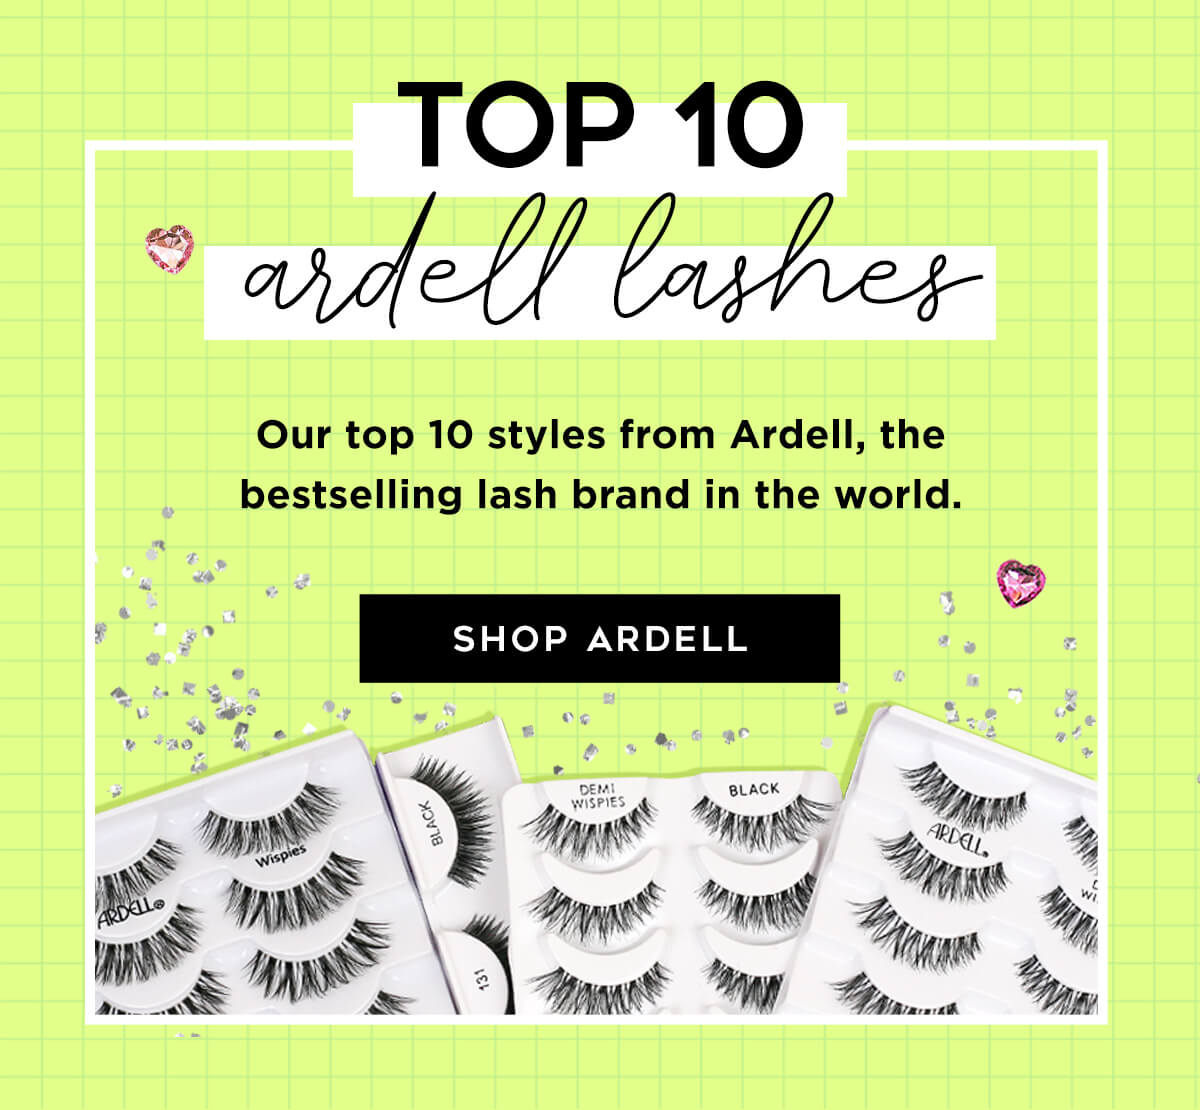 Top 10 Ardell Lashes